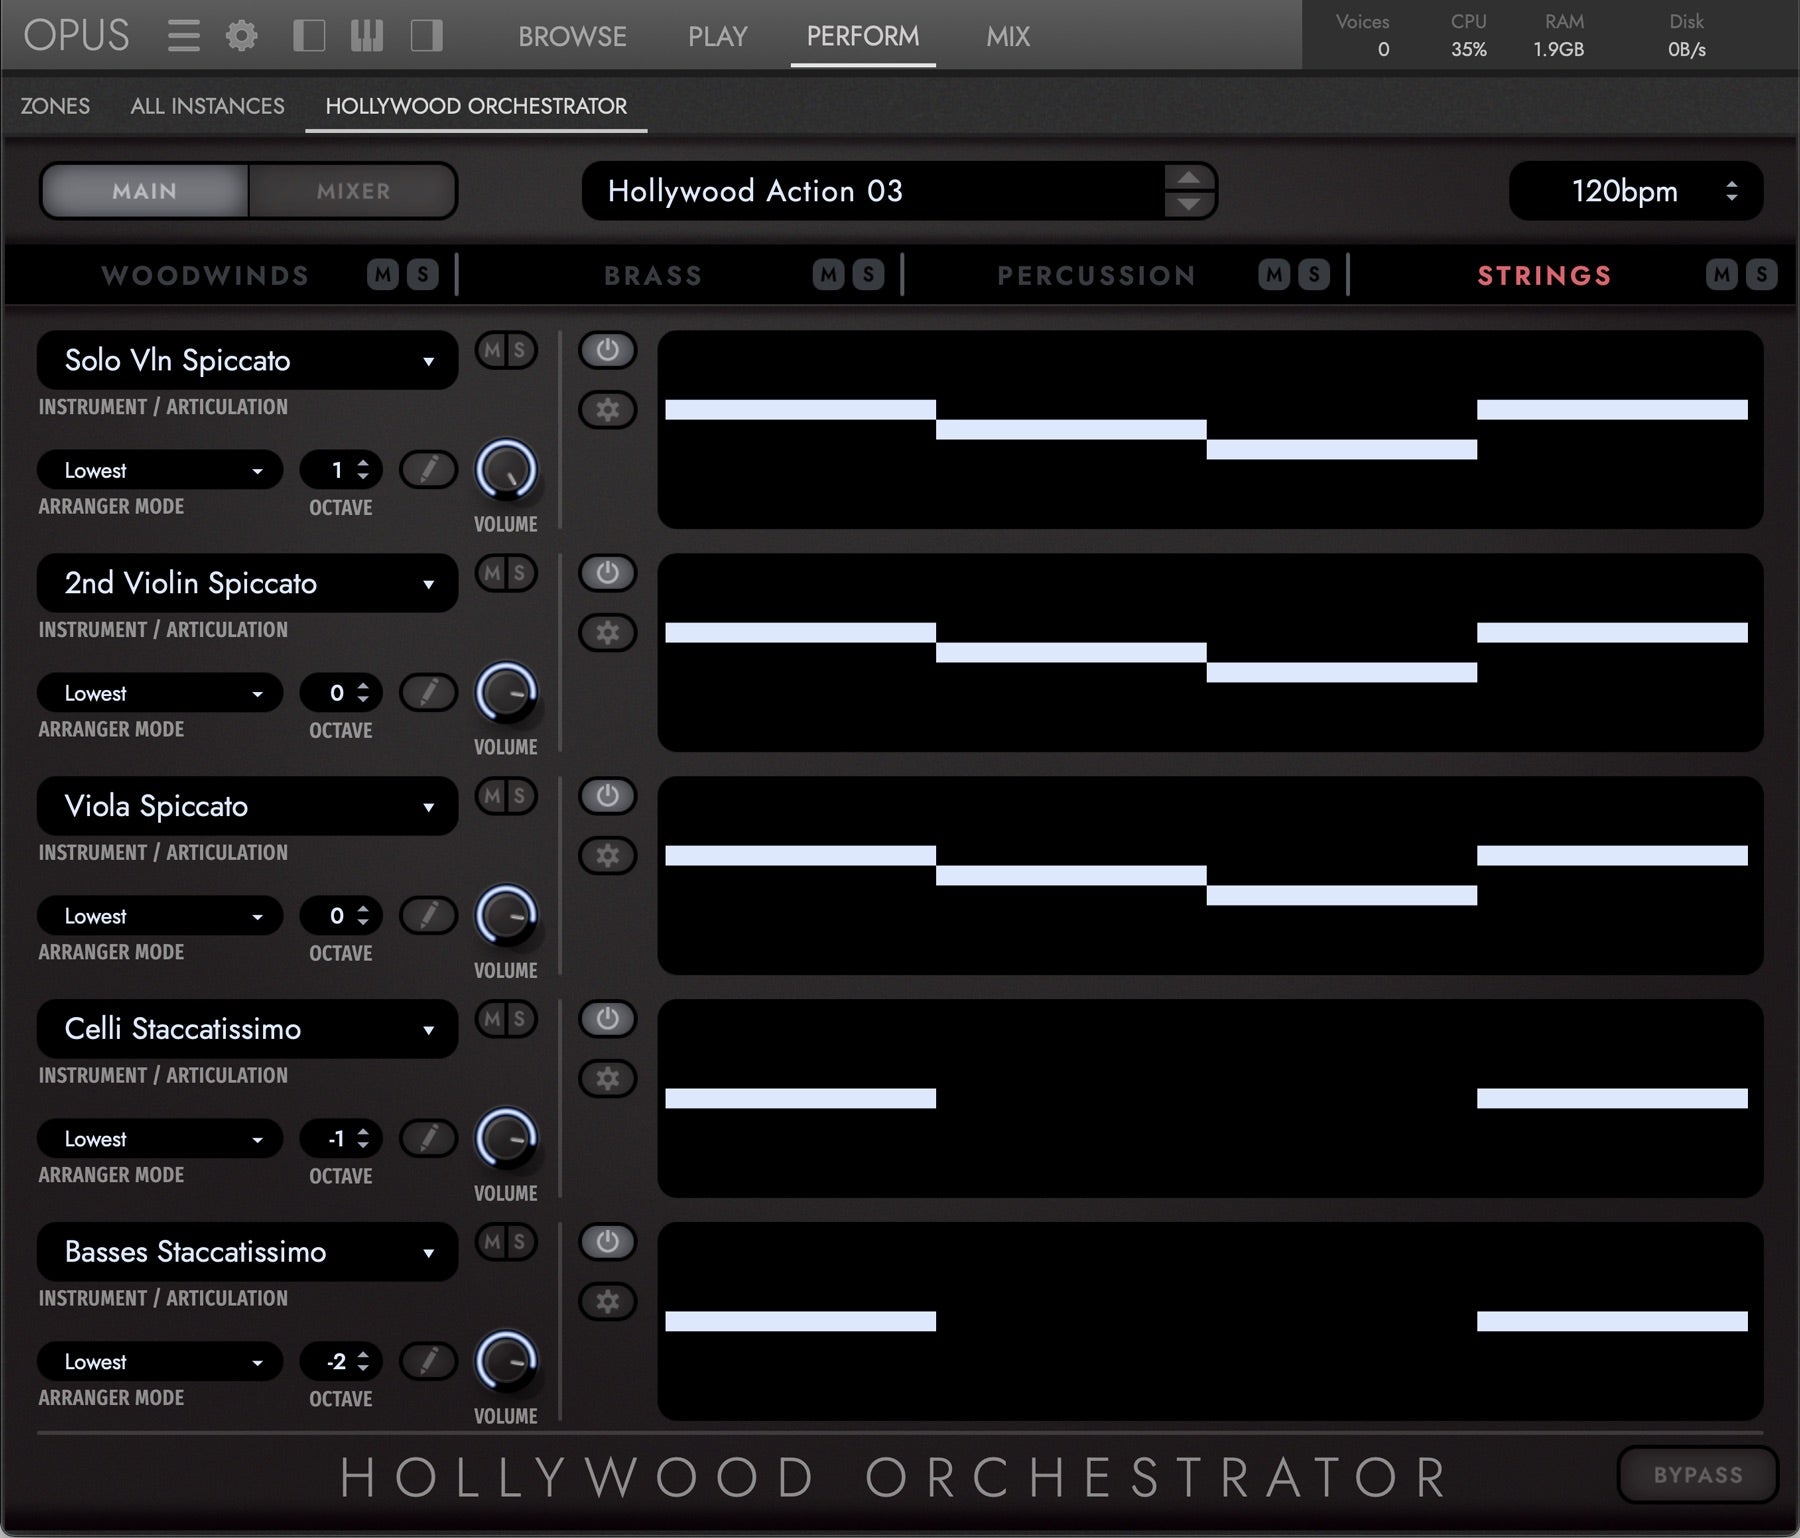 EastWest Hollywood Orchestra Opus - Diamond Edition Orchestrator